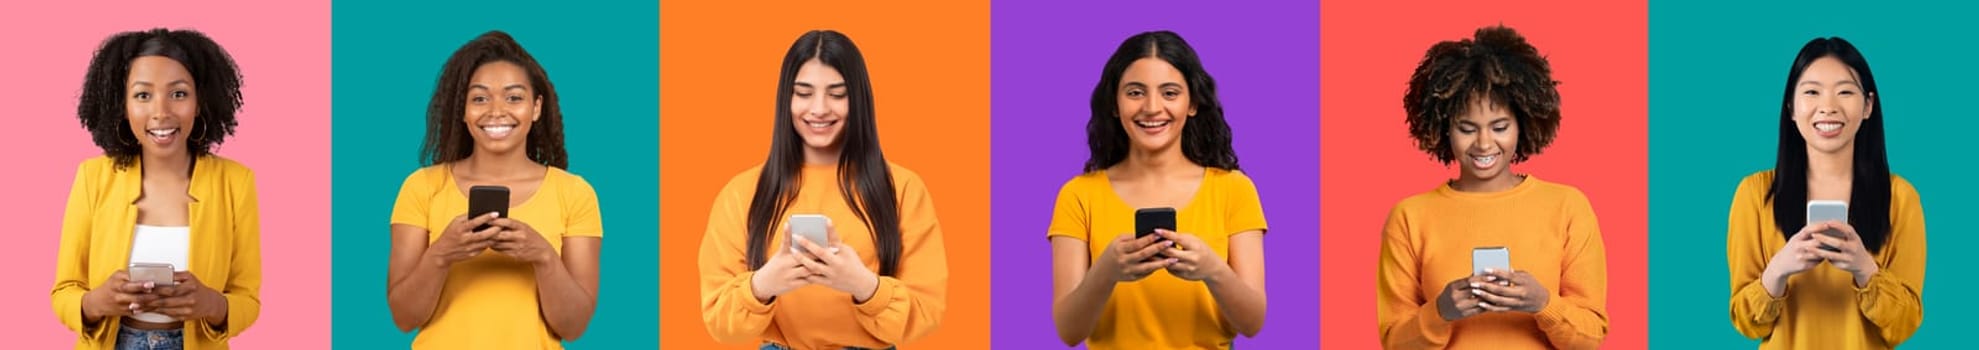 Diverse group of six young women smiling and holding smartphones